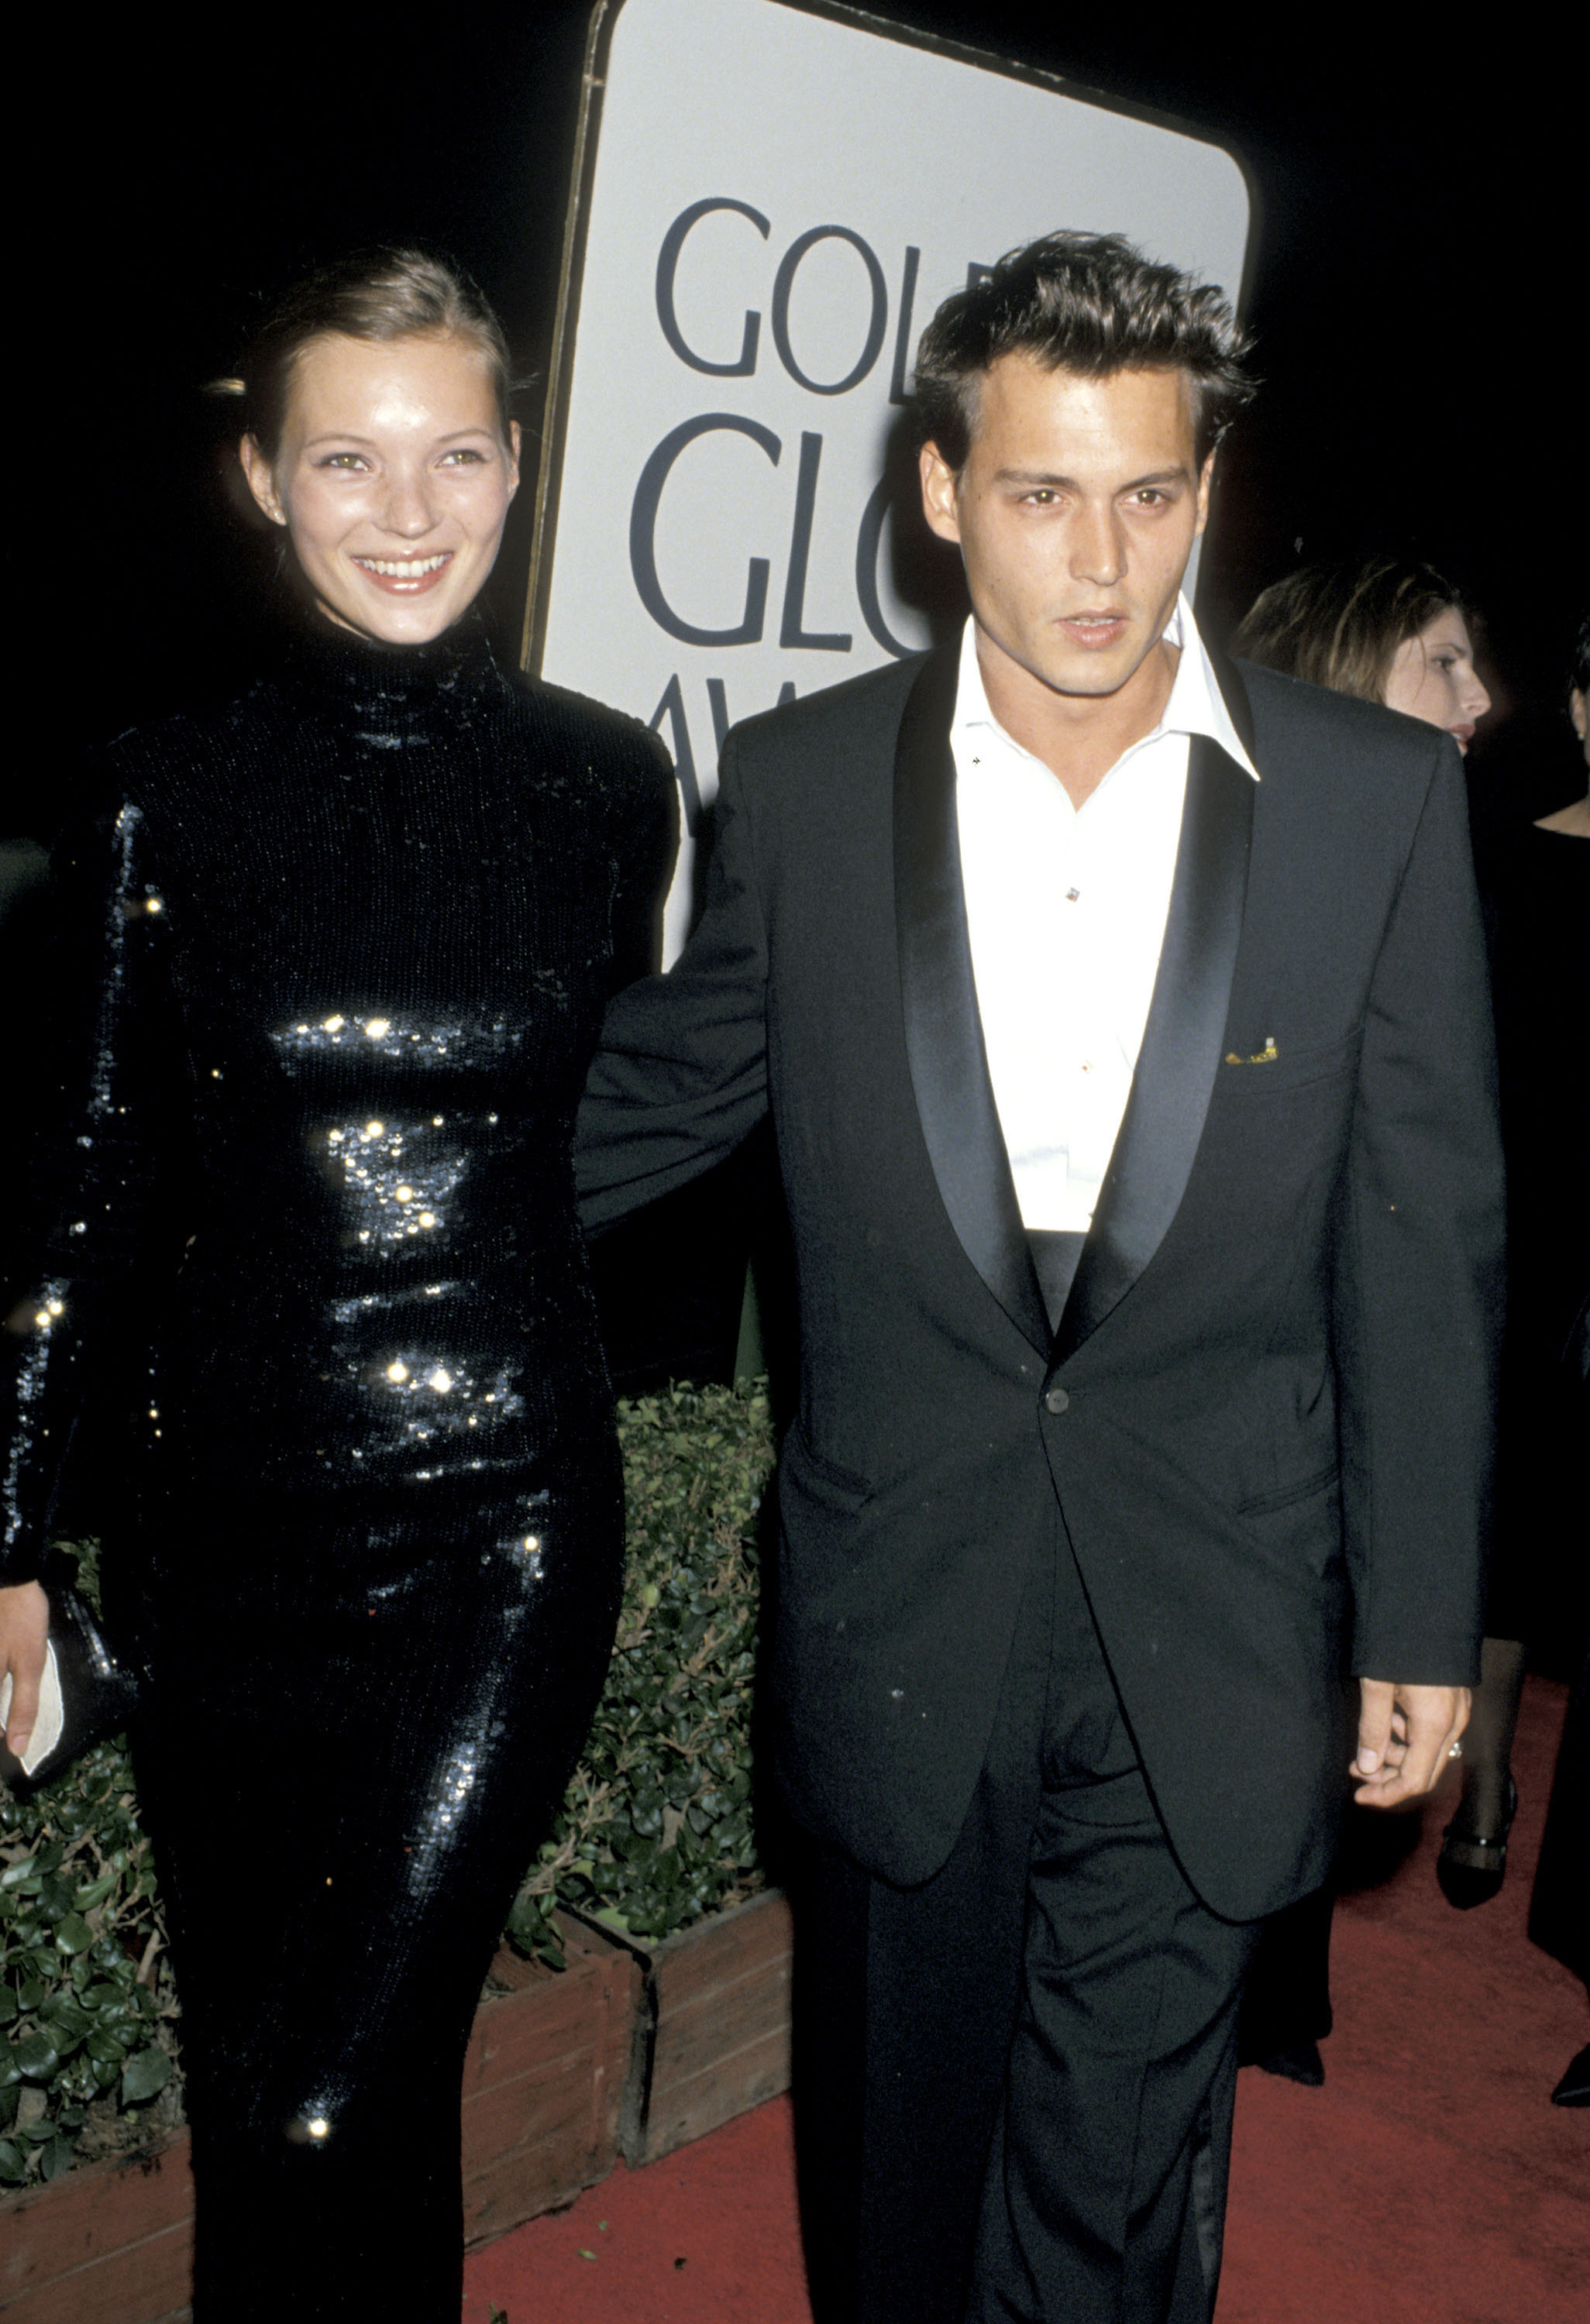 Kate Moss and Johnny Depp at the 52nd Annual Golden Globe Awards in 1995.